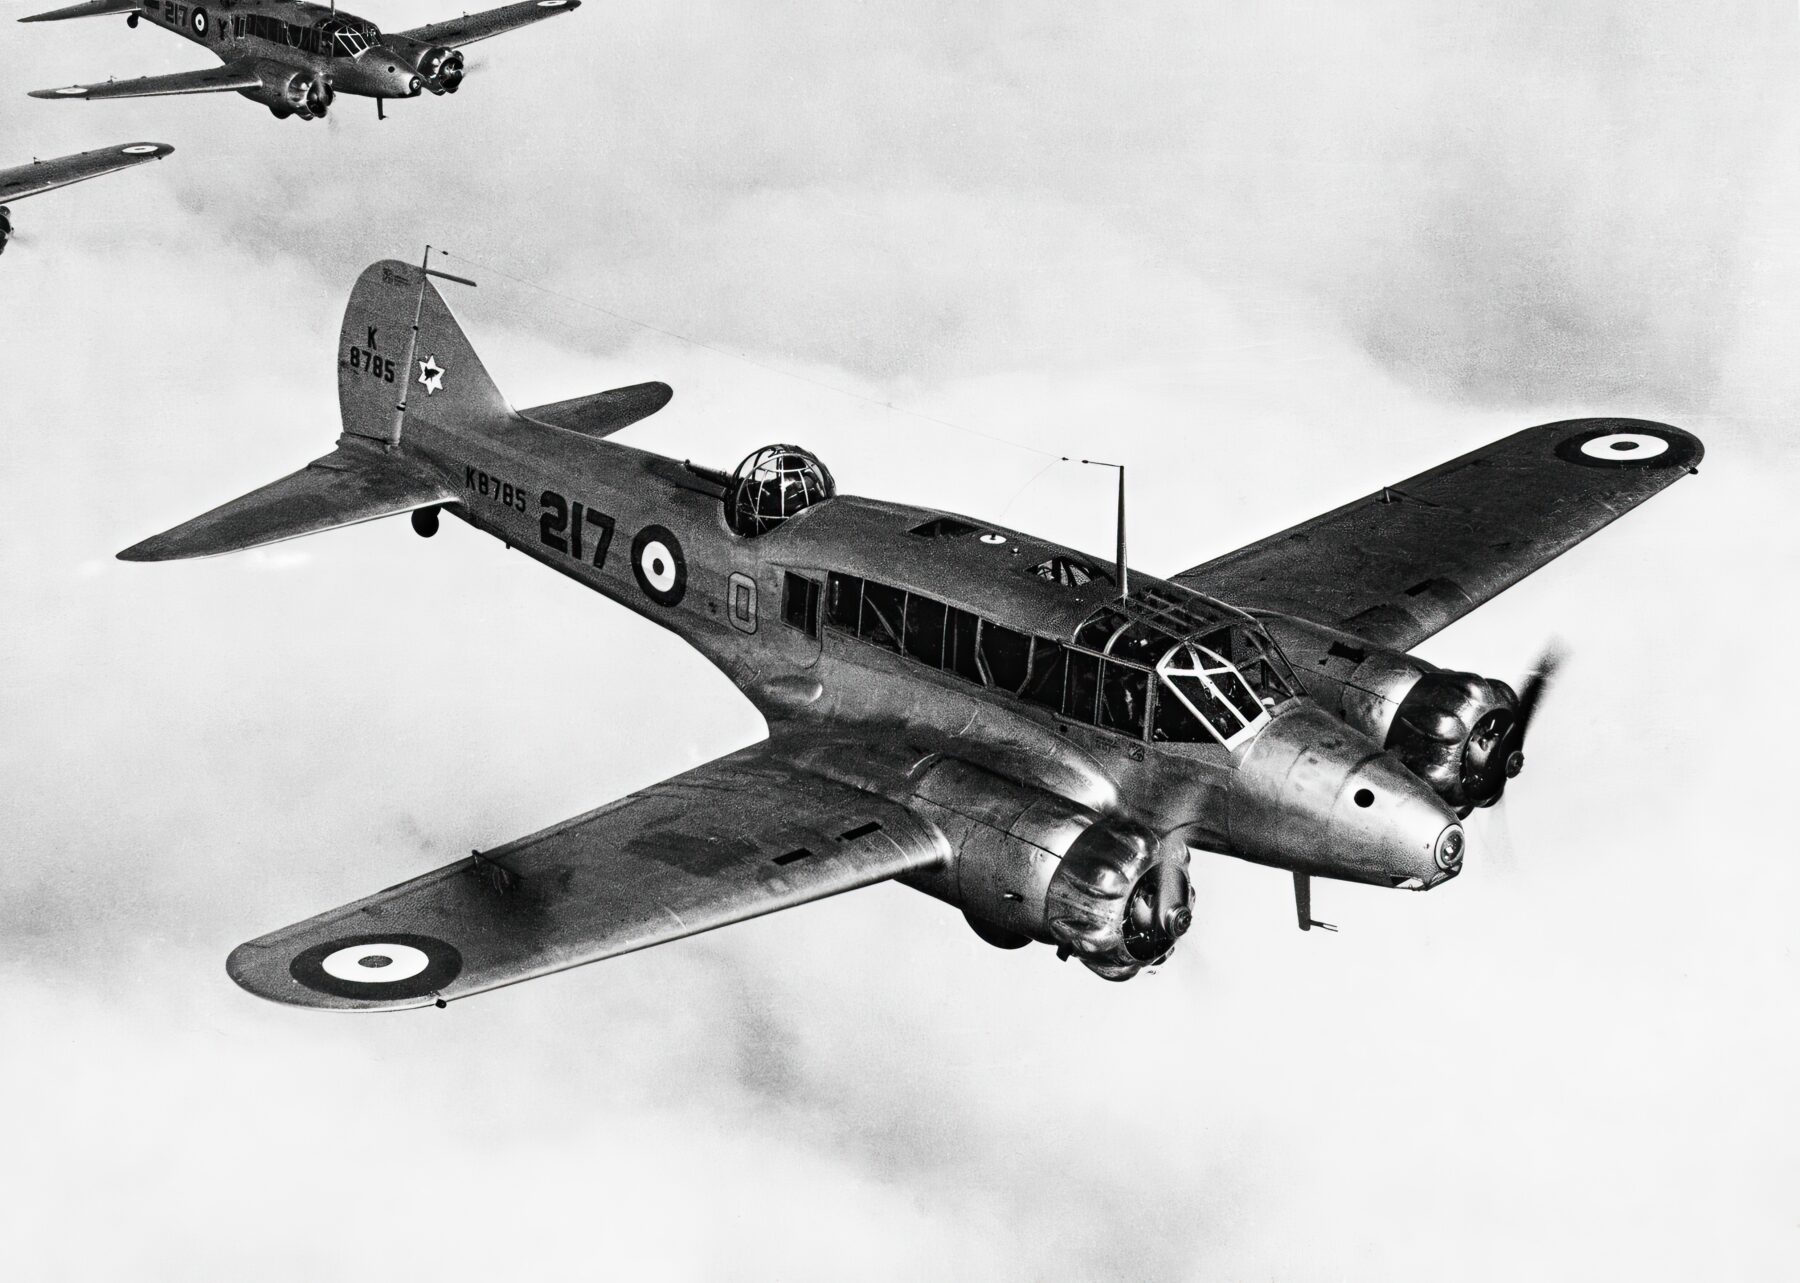 Avro Anson Mark 1 K8785 of No.217 Squadron, in flight with other aircraft, 1937